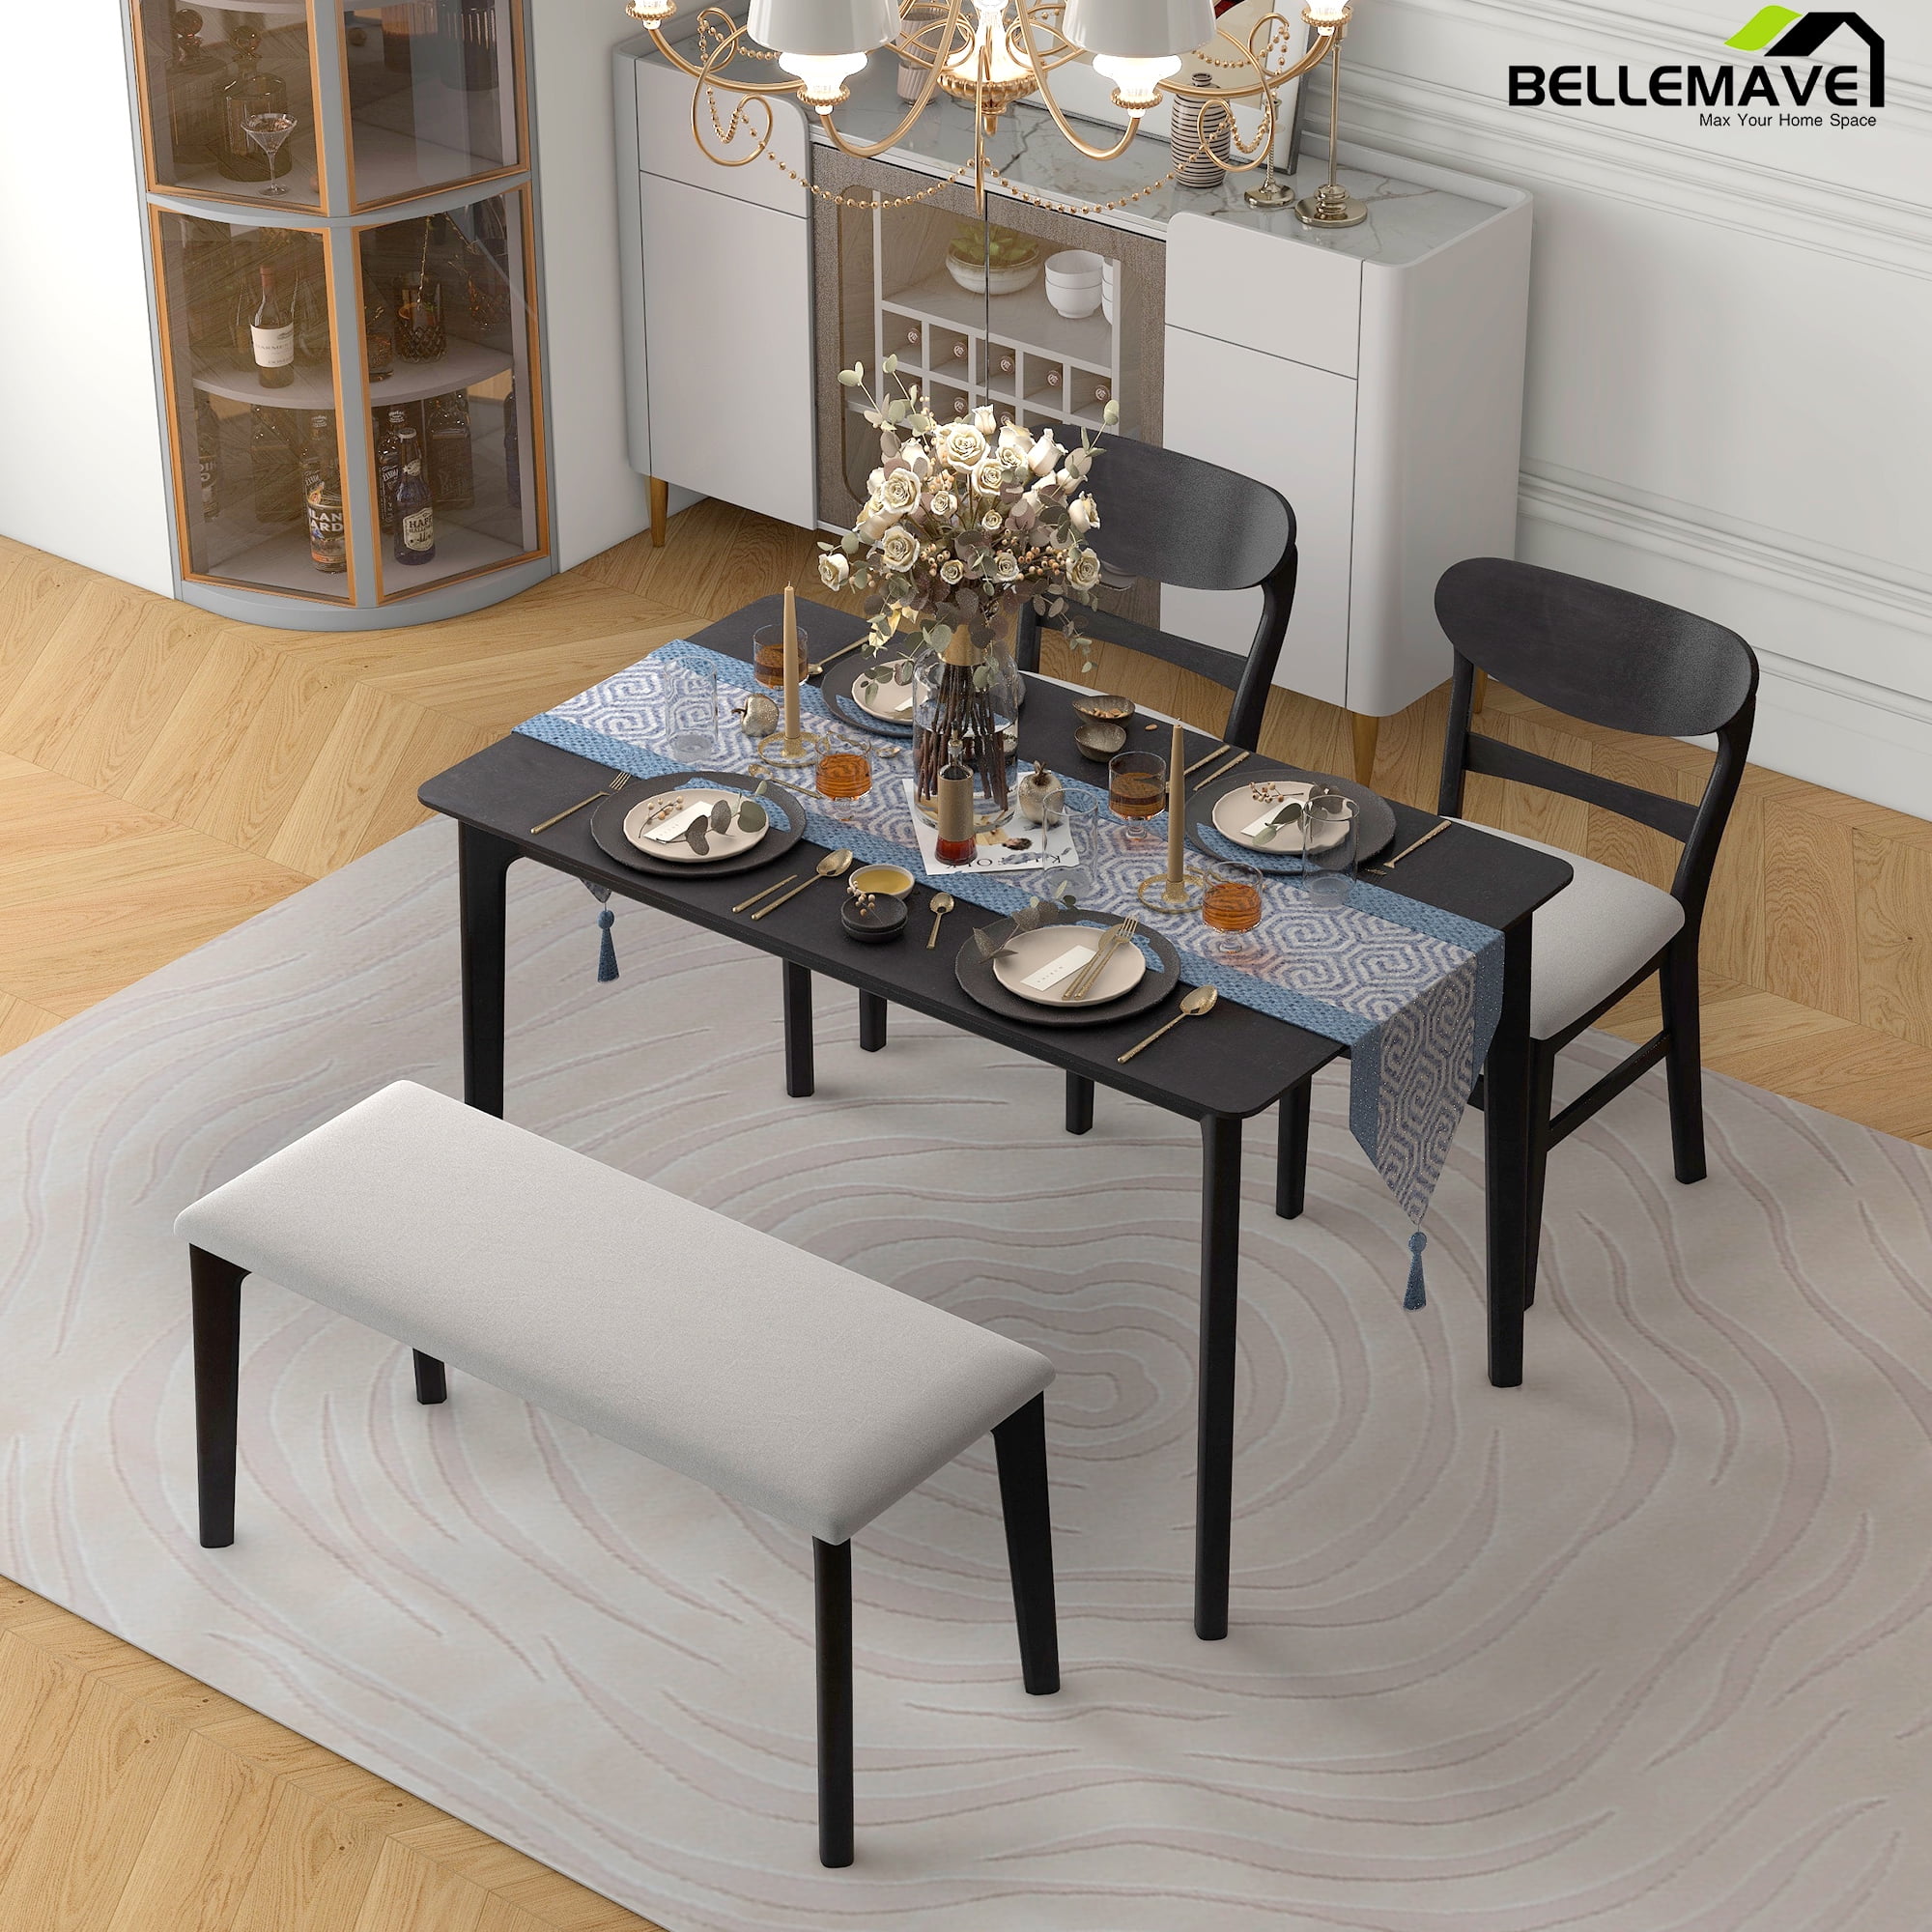 Bellemave 5-Piece Wood Dining Room Table Set, Kitchen Dining Table Set ...